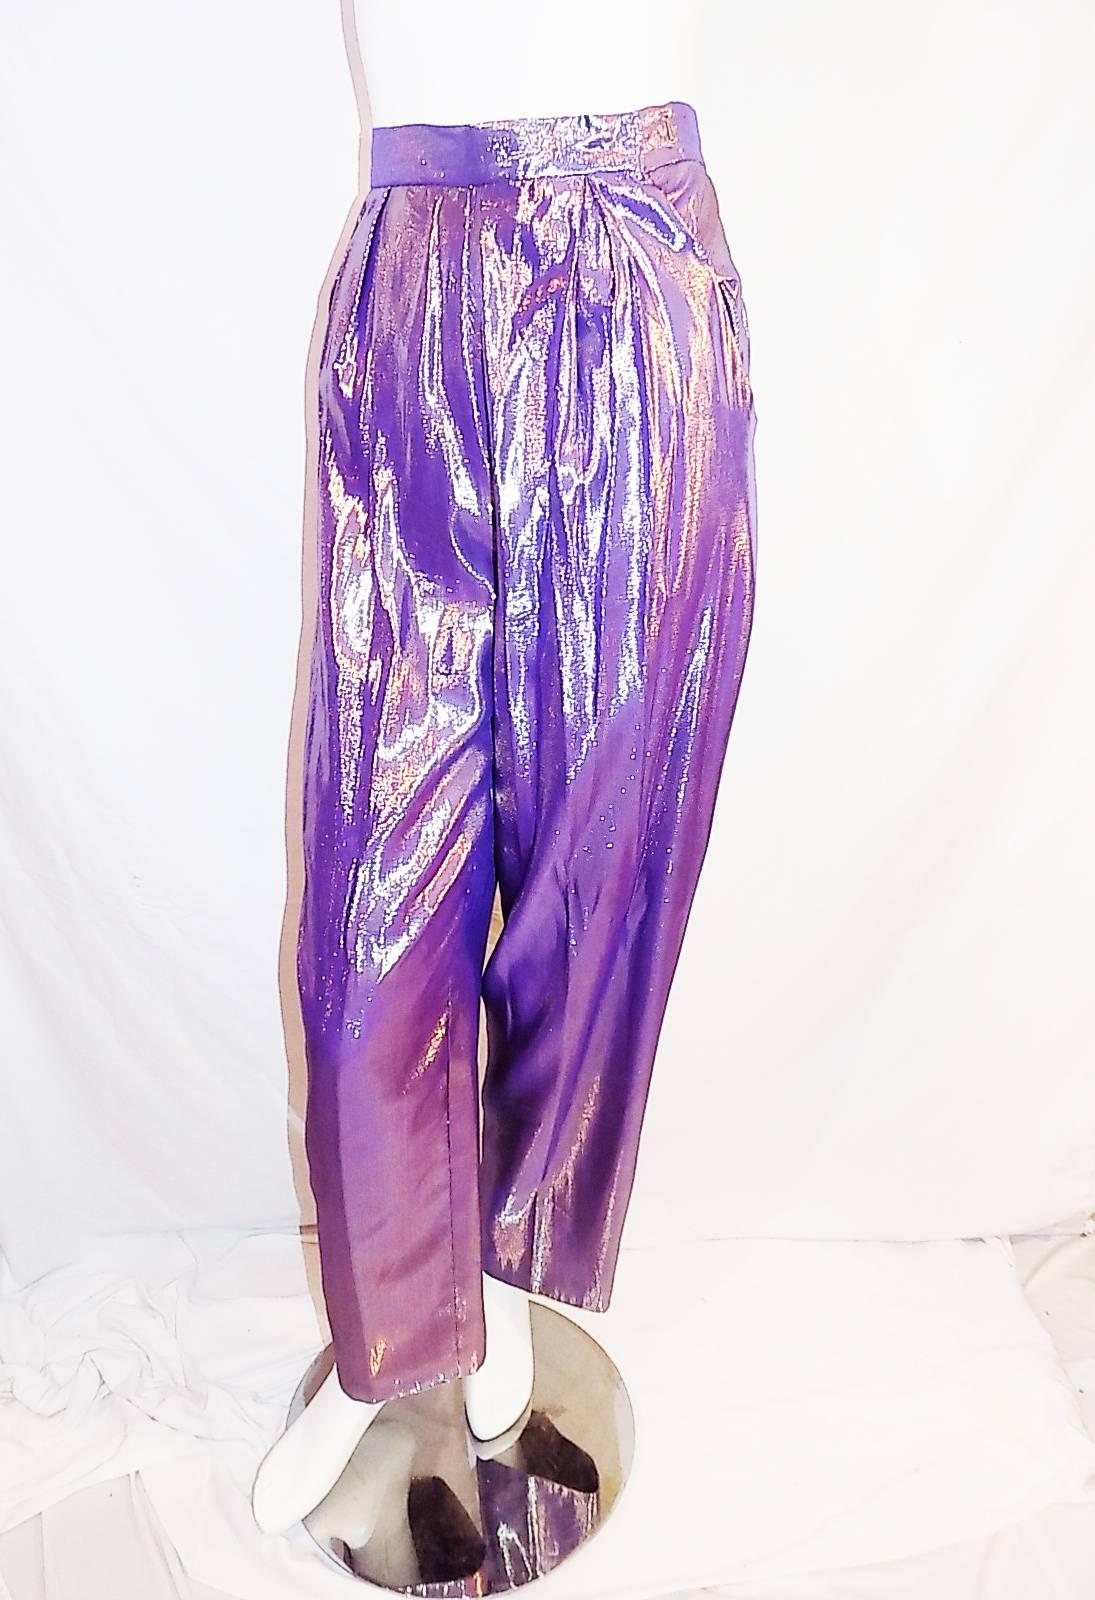 Giorgio Sant Angelo vintage lame purple pants disco era 70 In Excellent Condition For Sale In New York, NY